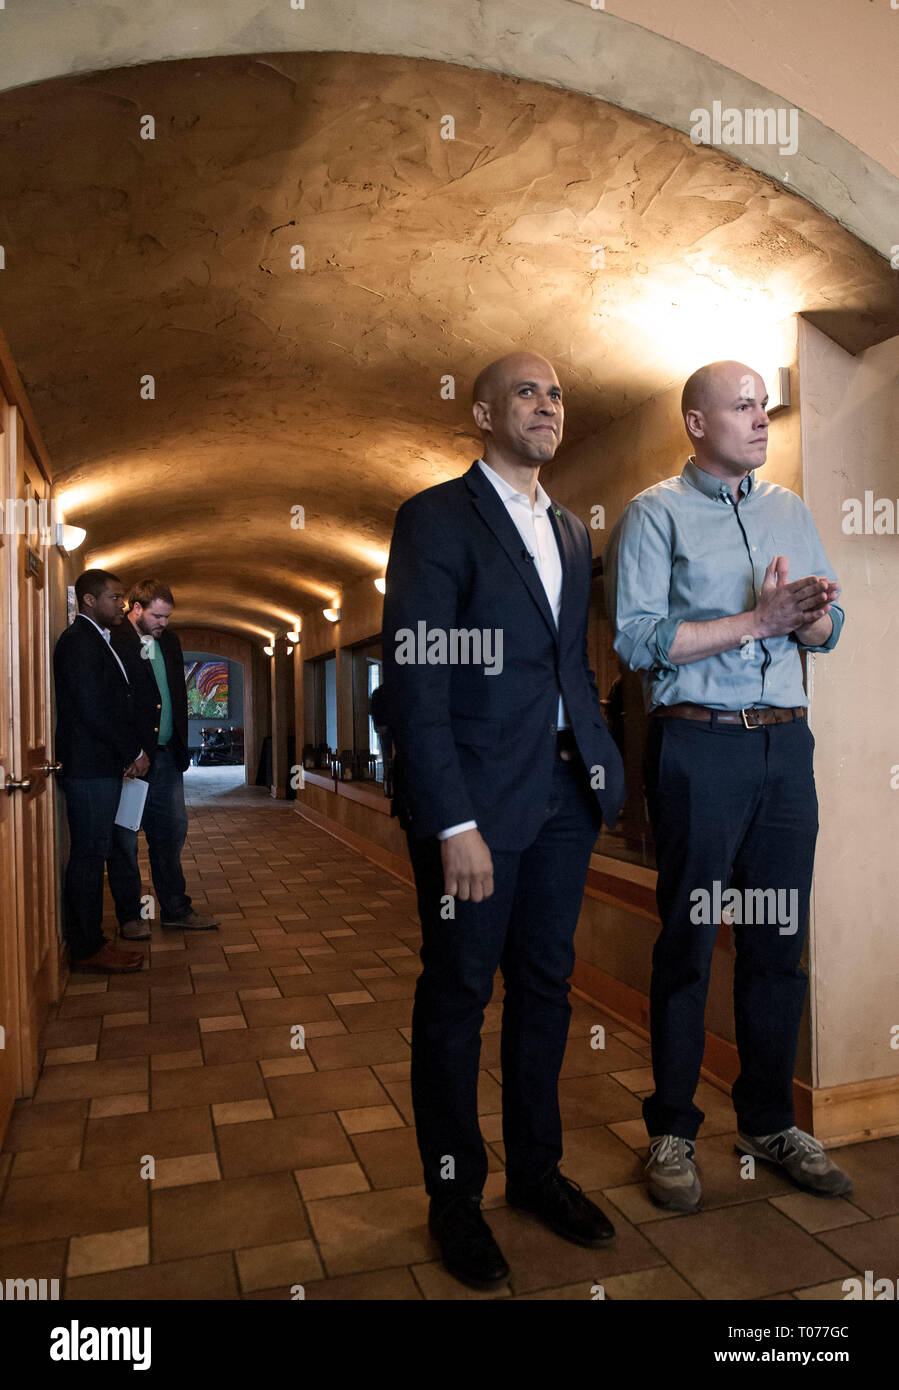 Ames, Iowa, USA. 17th Mar, 2019. Democratic presidential candidate, U.S. Senator CORY BOOKER (D-NJ), and JD SCHOLTEN listen as they are introduced during a Conversation with Cory and meet and greet with Iowa voters at the Prairie Moon Winery. Credit: Brian Cahn/ZUMA Wire/Alamy Live News Stock Photo